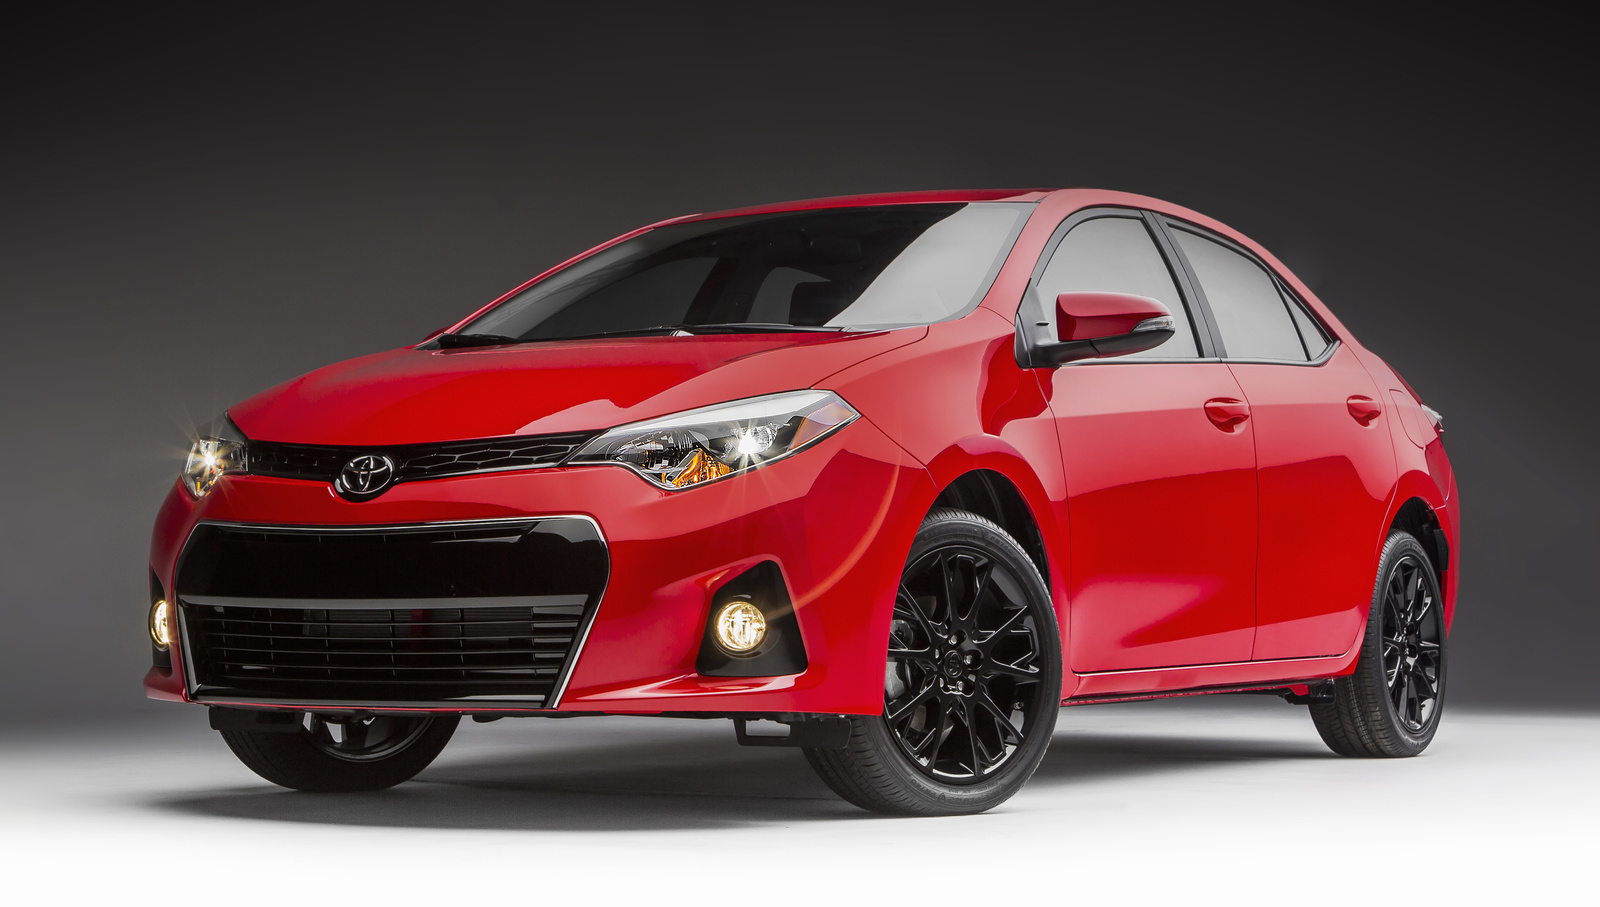 2016 Toyota Corolla: Prices, Reviews & Pictures - CarGurus